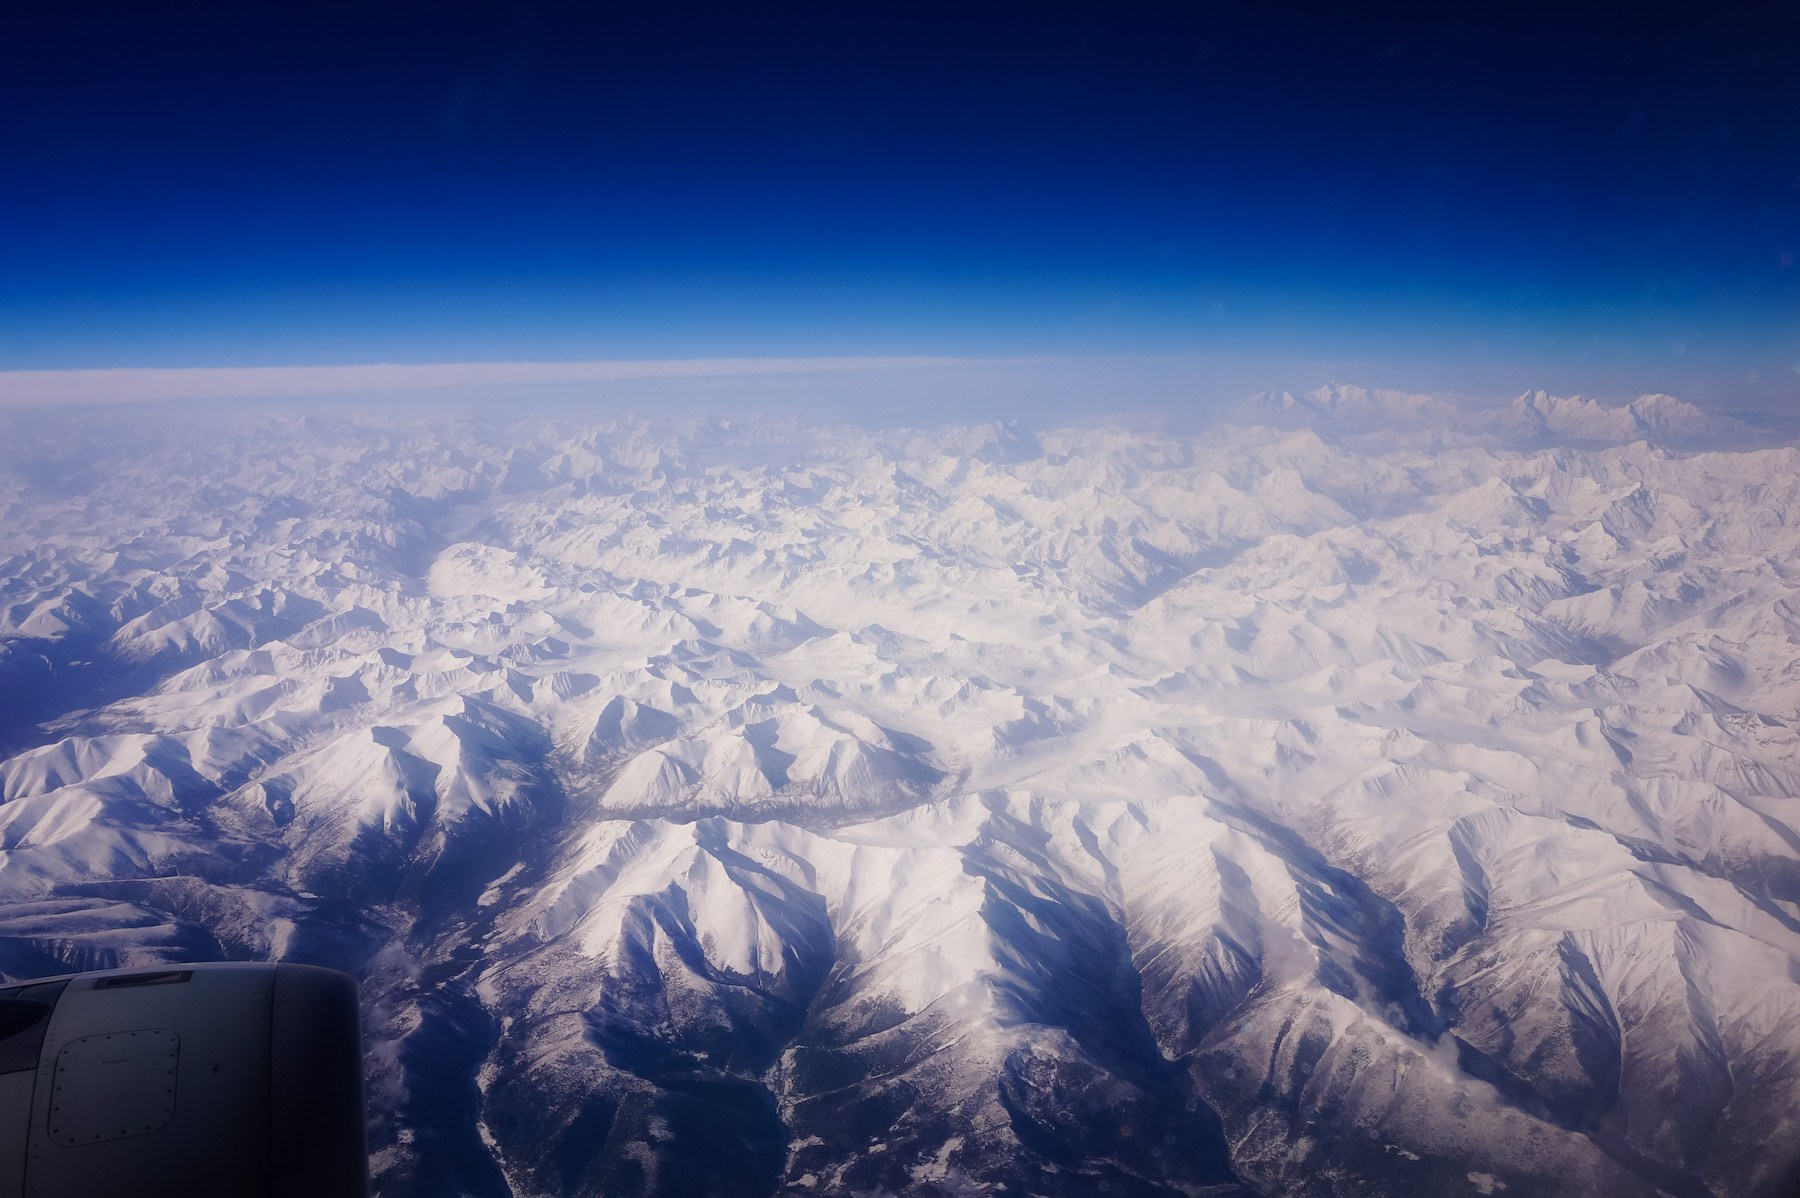 What to expect at high altitudes in Tibet - altitude sickness in Tibet